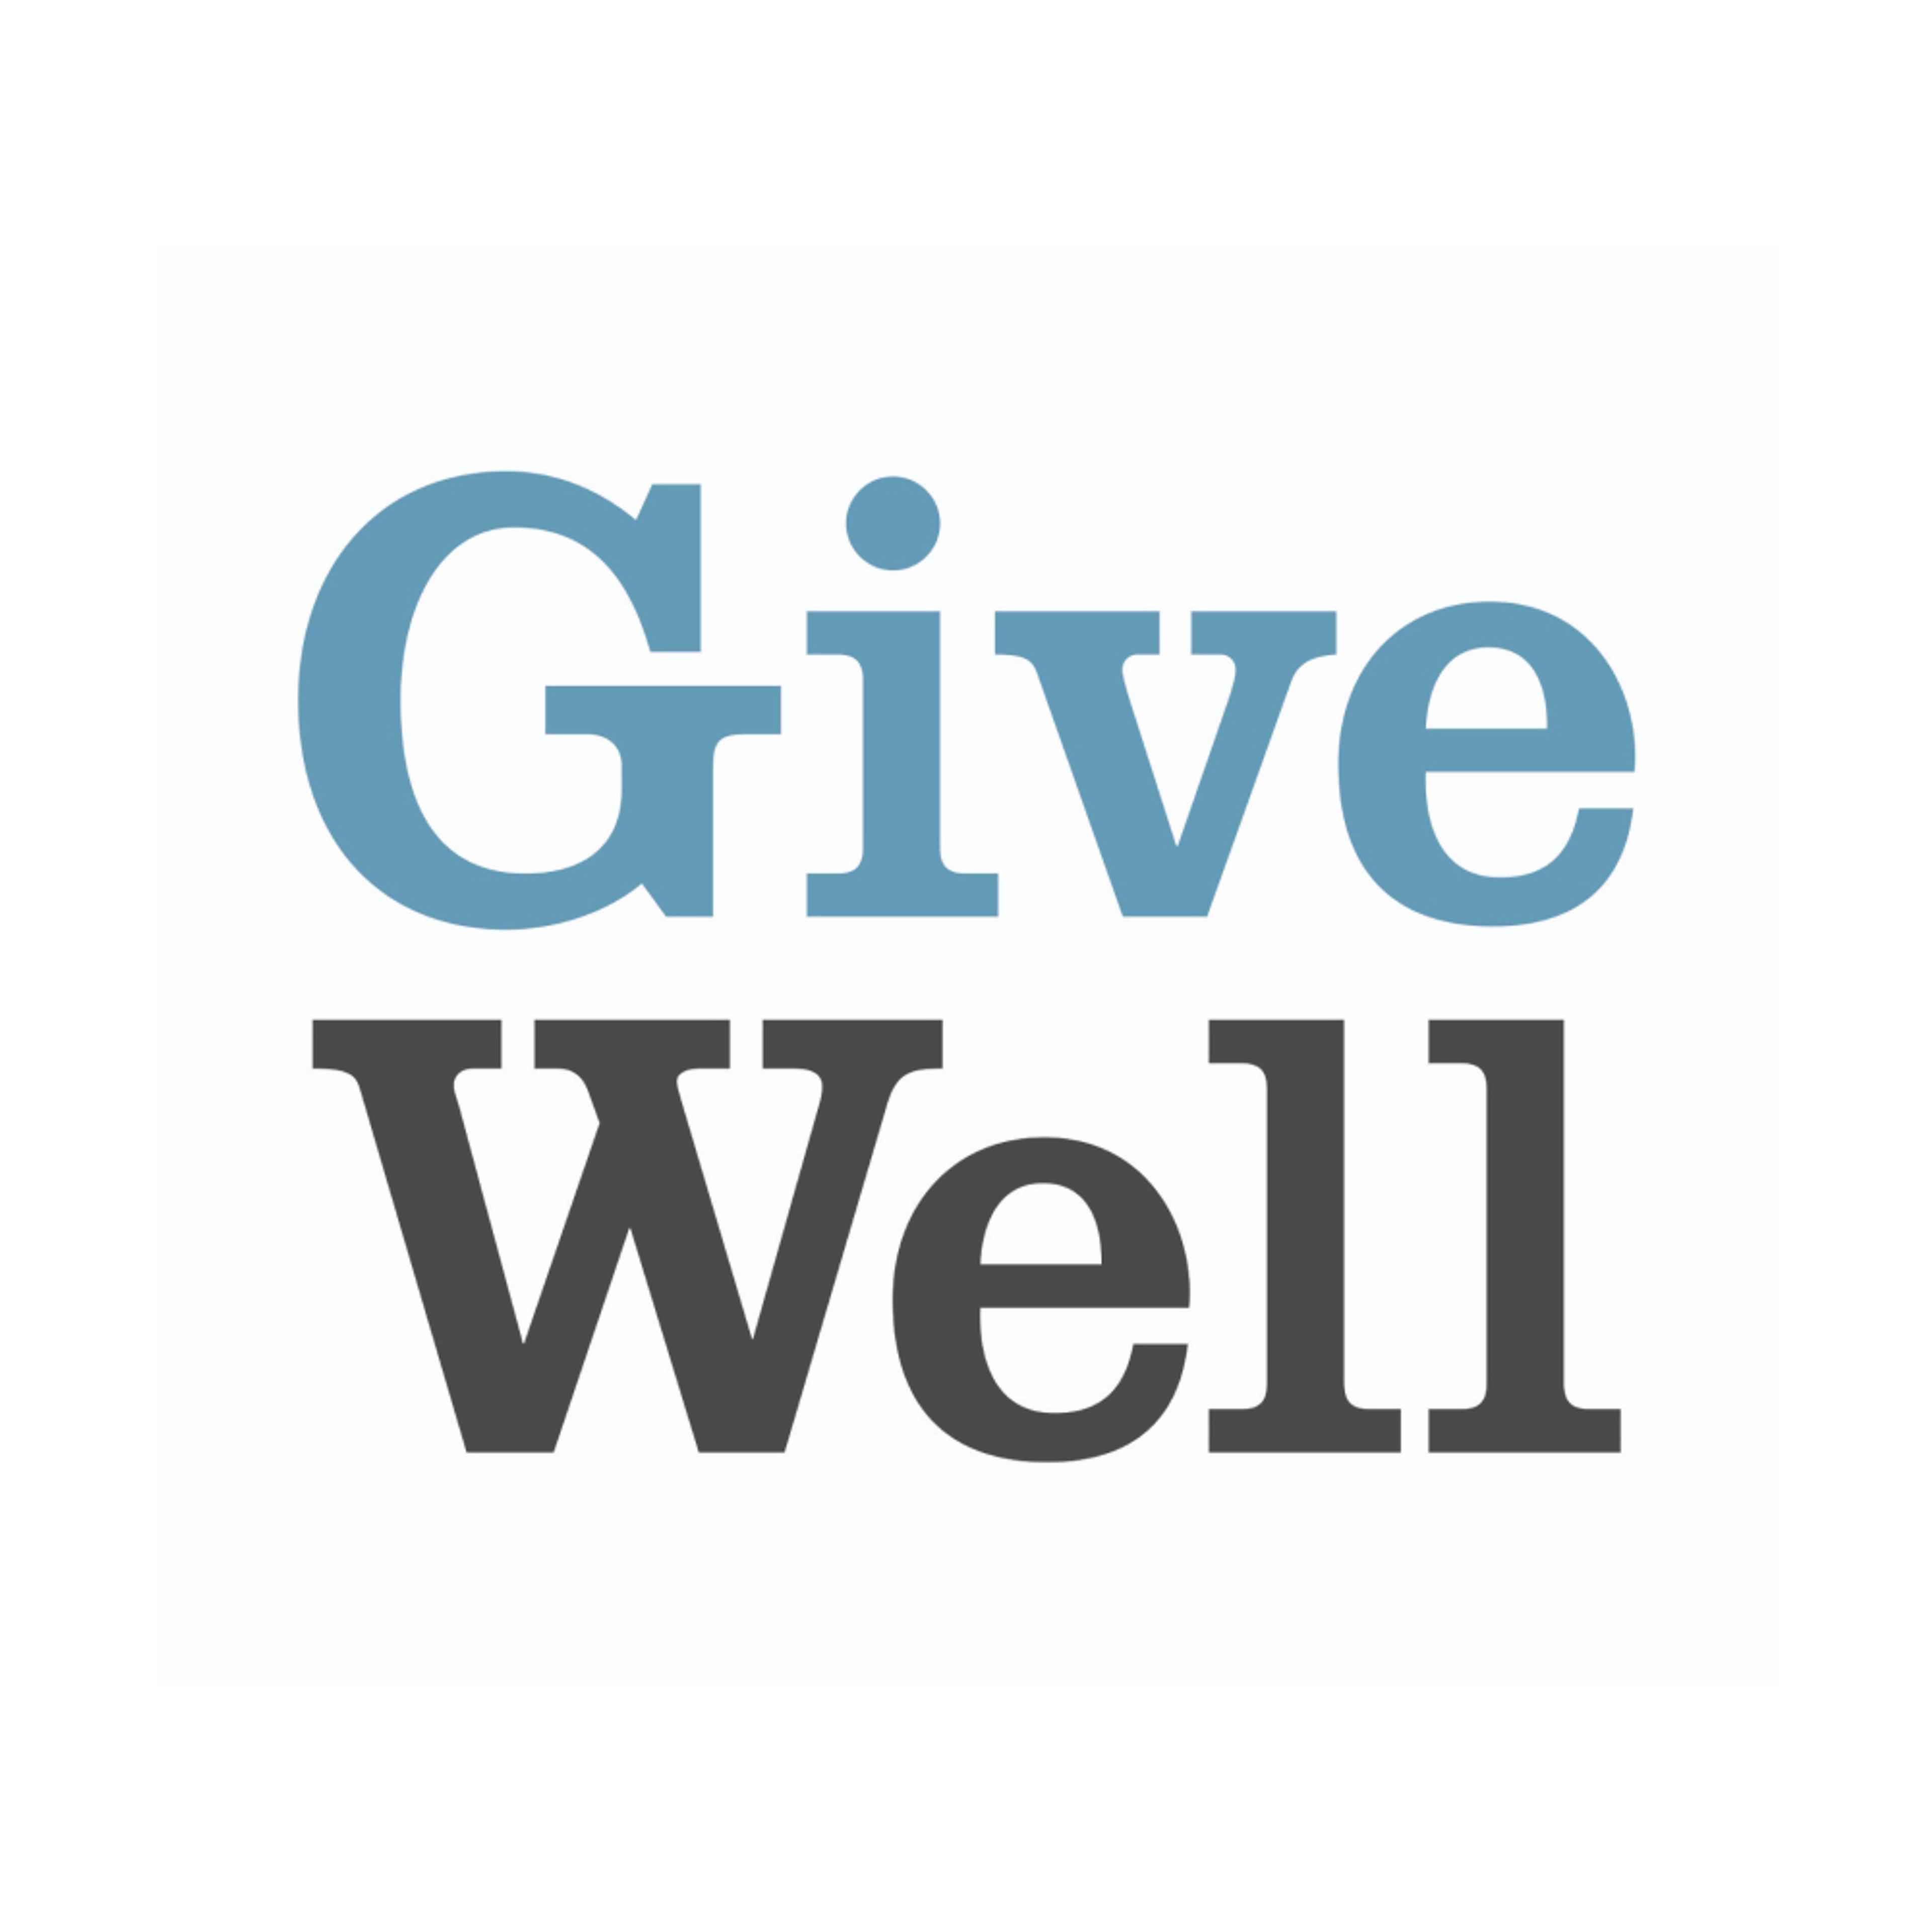 GiveWell: All Grants Fund